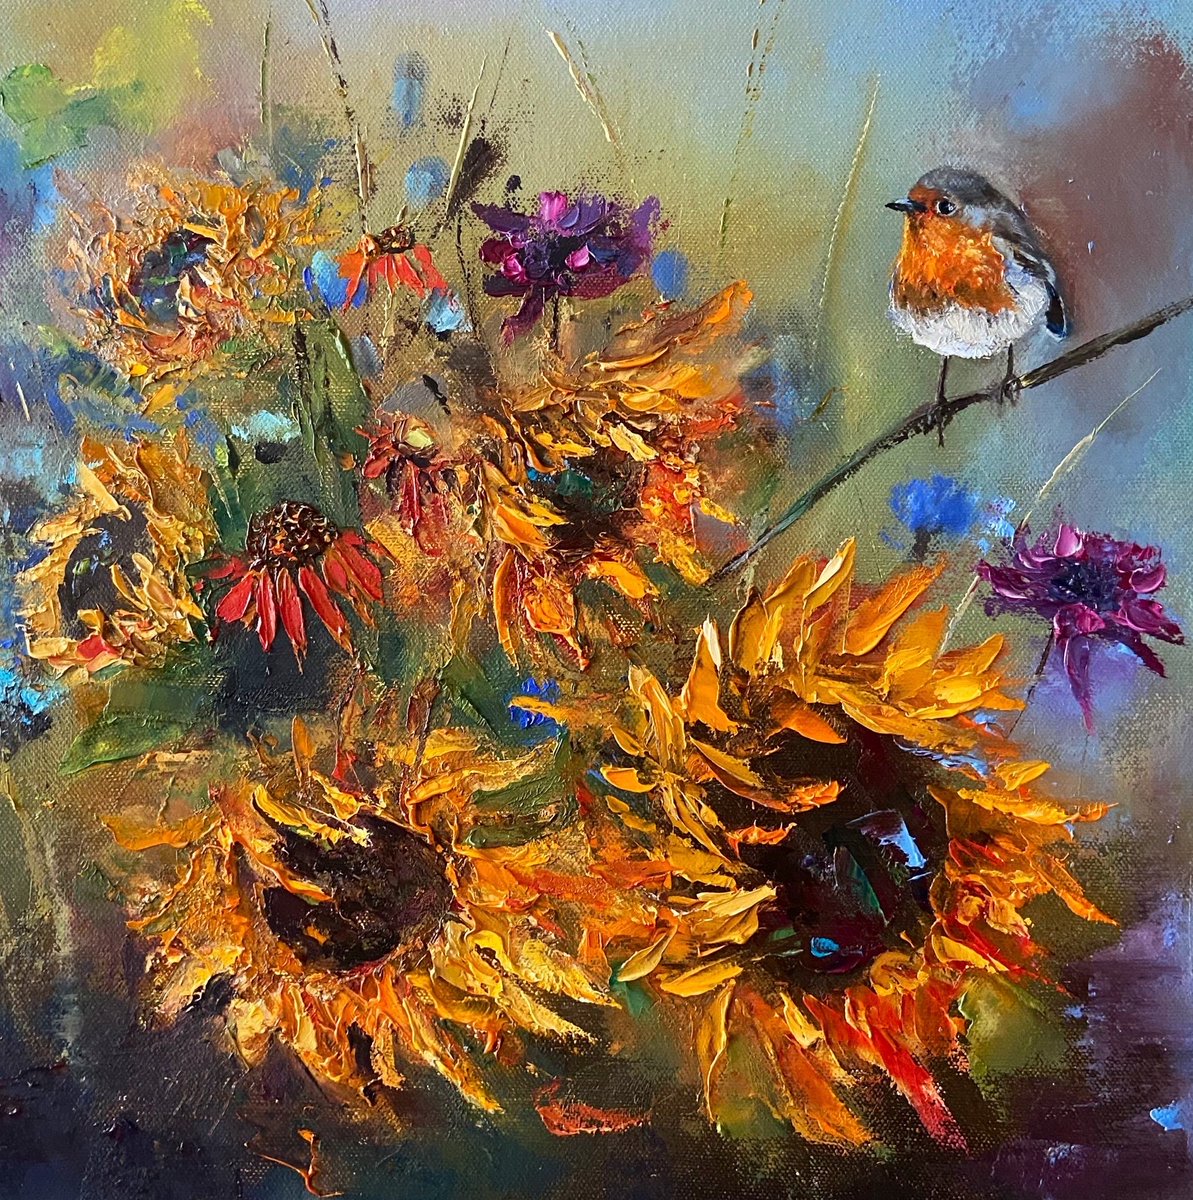 🌻 For all sunflower and robin lovers! Sharing one of my oil paintings, 40cm x 40cm, featuring these beautiful subjects. I hope it brings some sunshine ☀️ to your day!

paintingsbyanna.etsy.com/listing/160889…